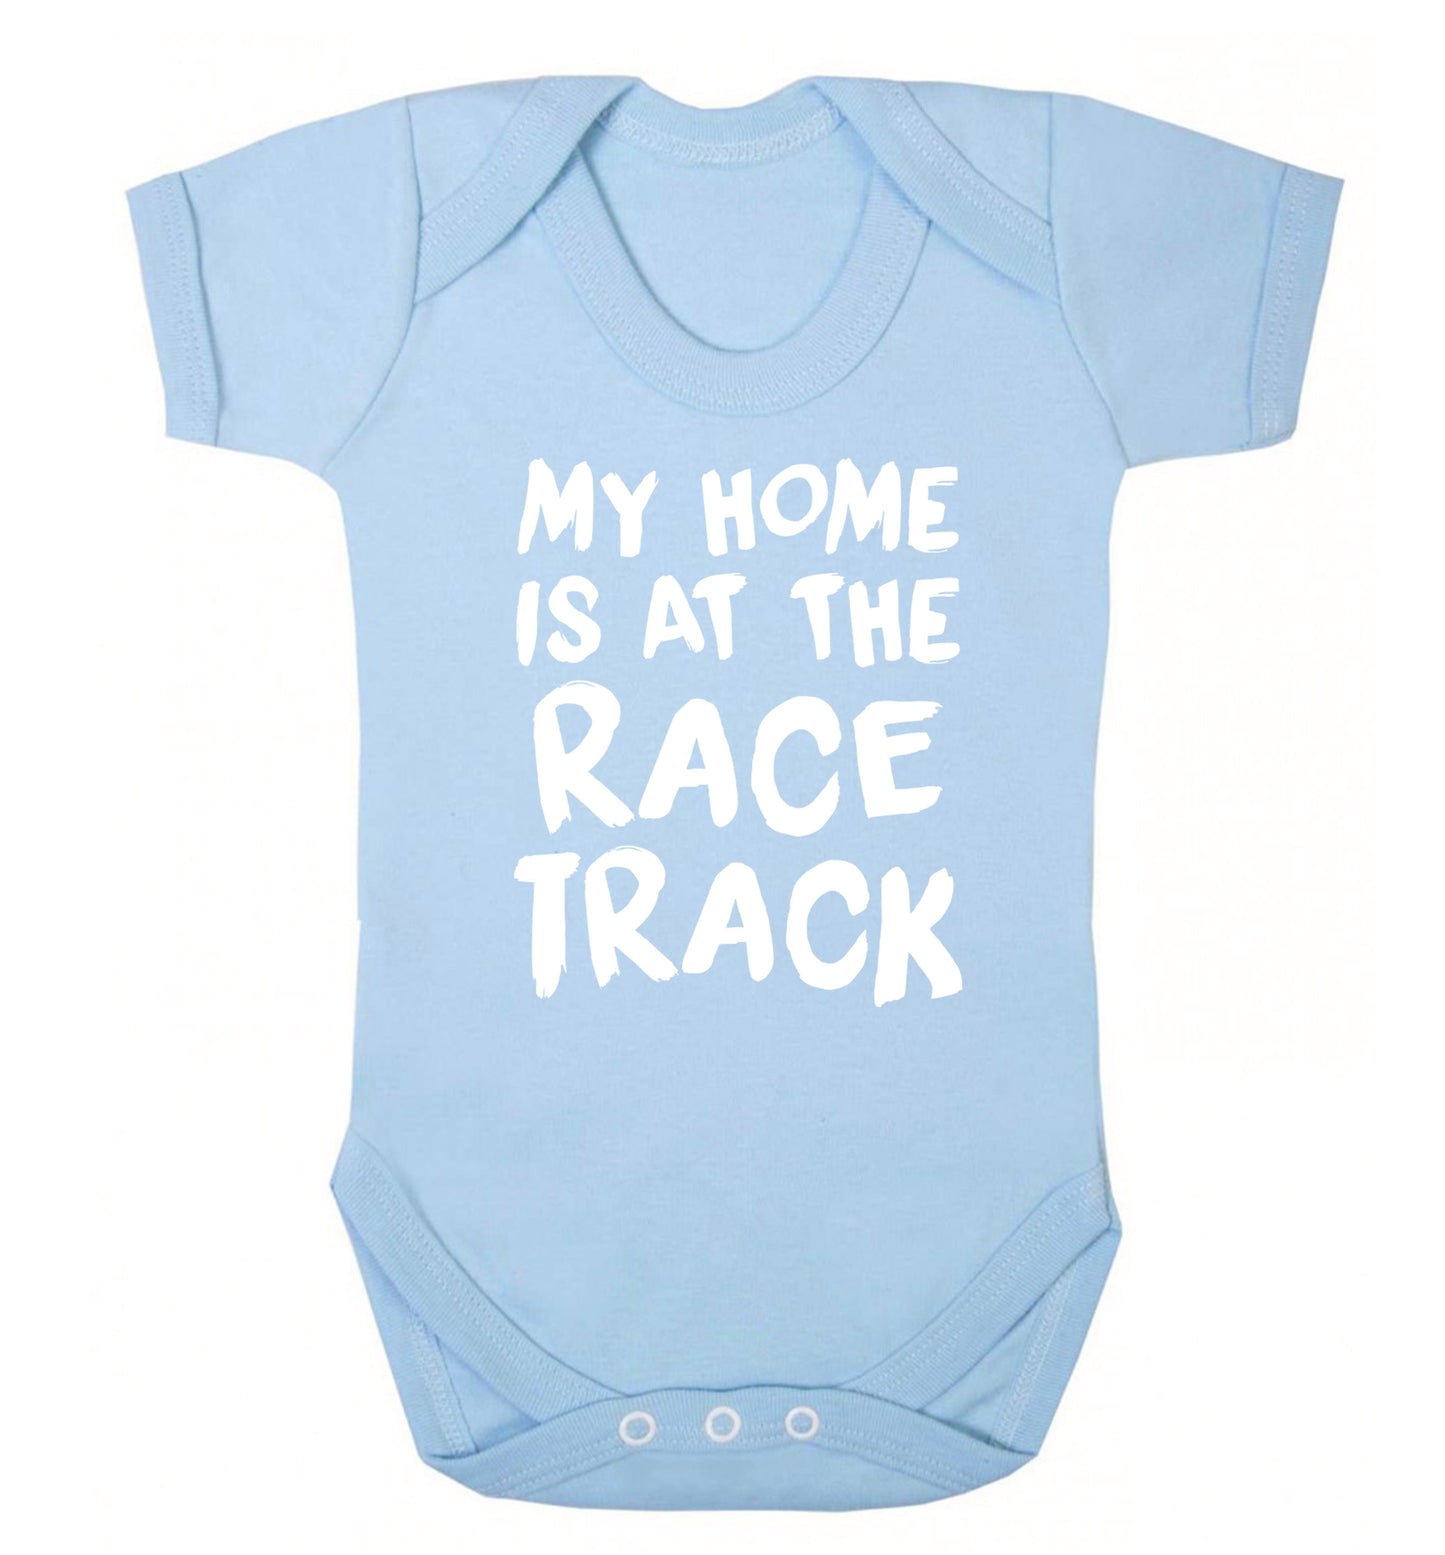 My home is at the race track Baby Vest pale blue 18-24 months